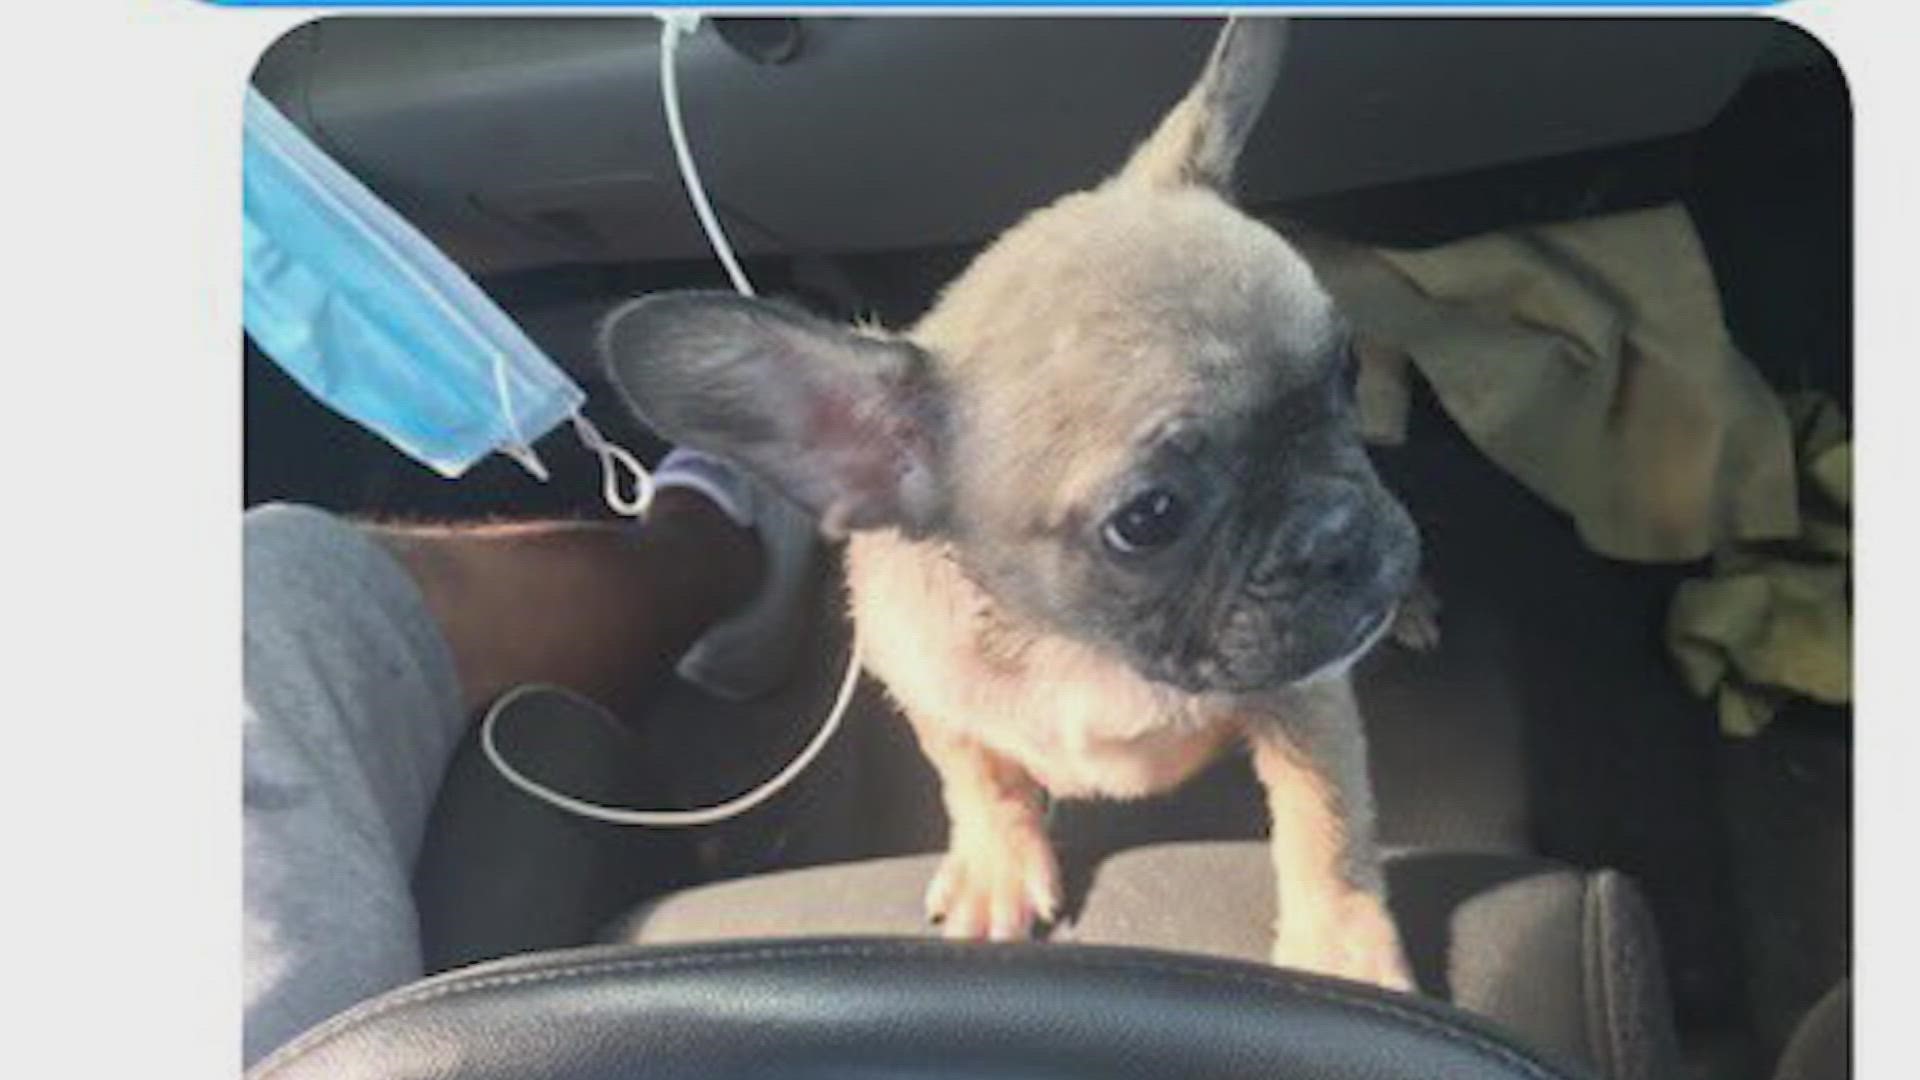 Police are searching for a man accused of robbing a person at gunpoint during the sale of a French bulldog puppy in Fort Worth.